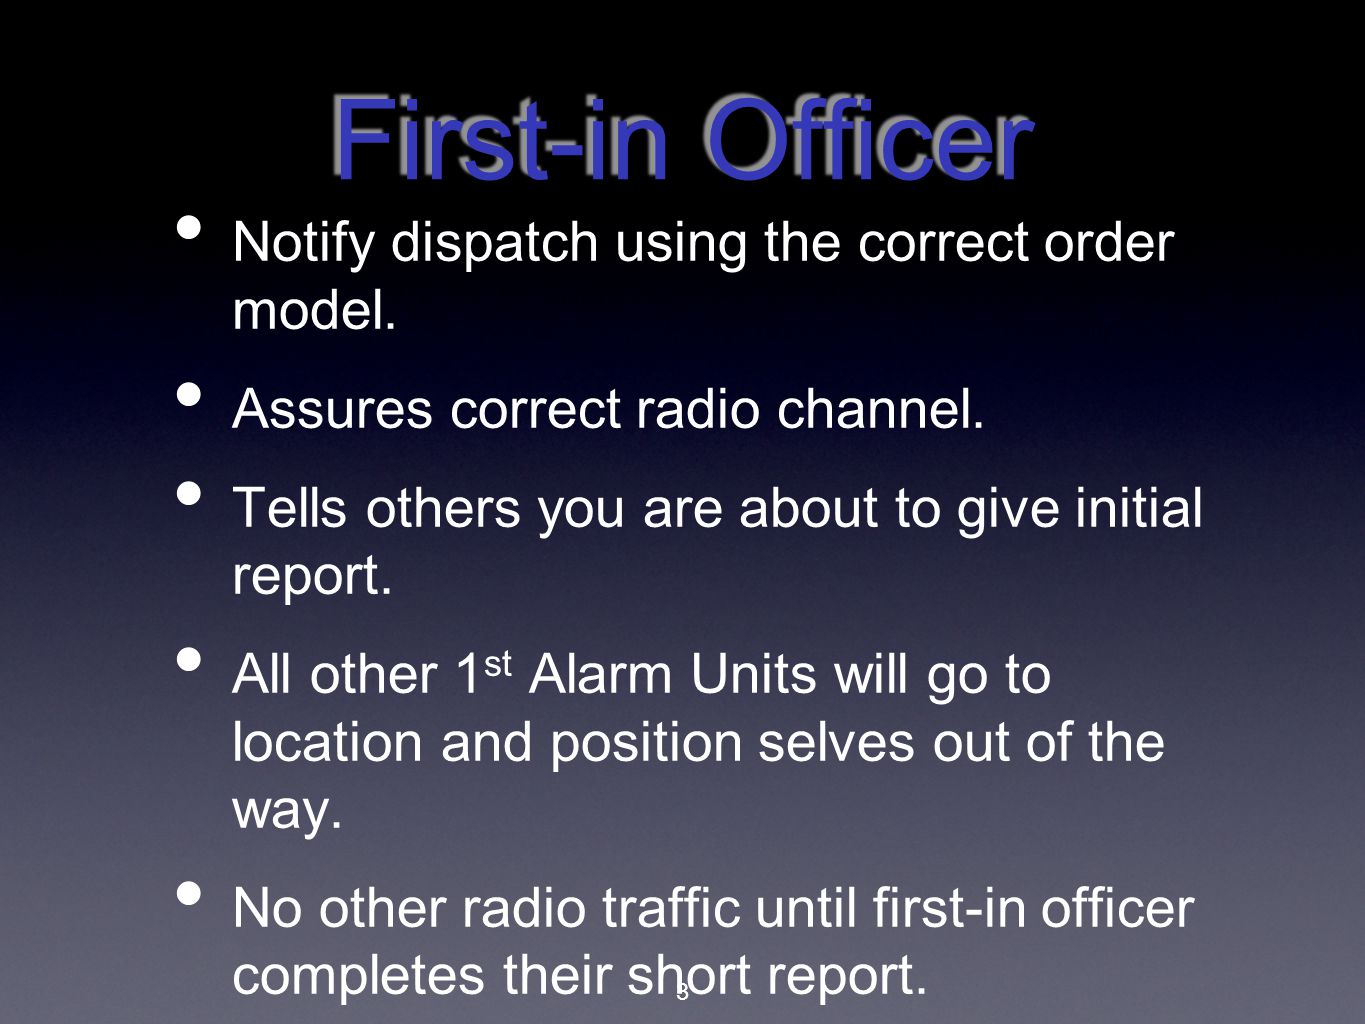 First-in Officer Notify dispatch using the correct order model.